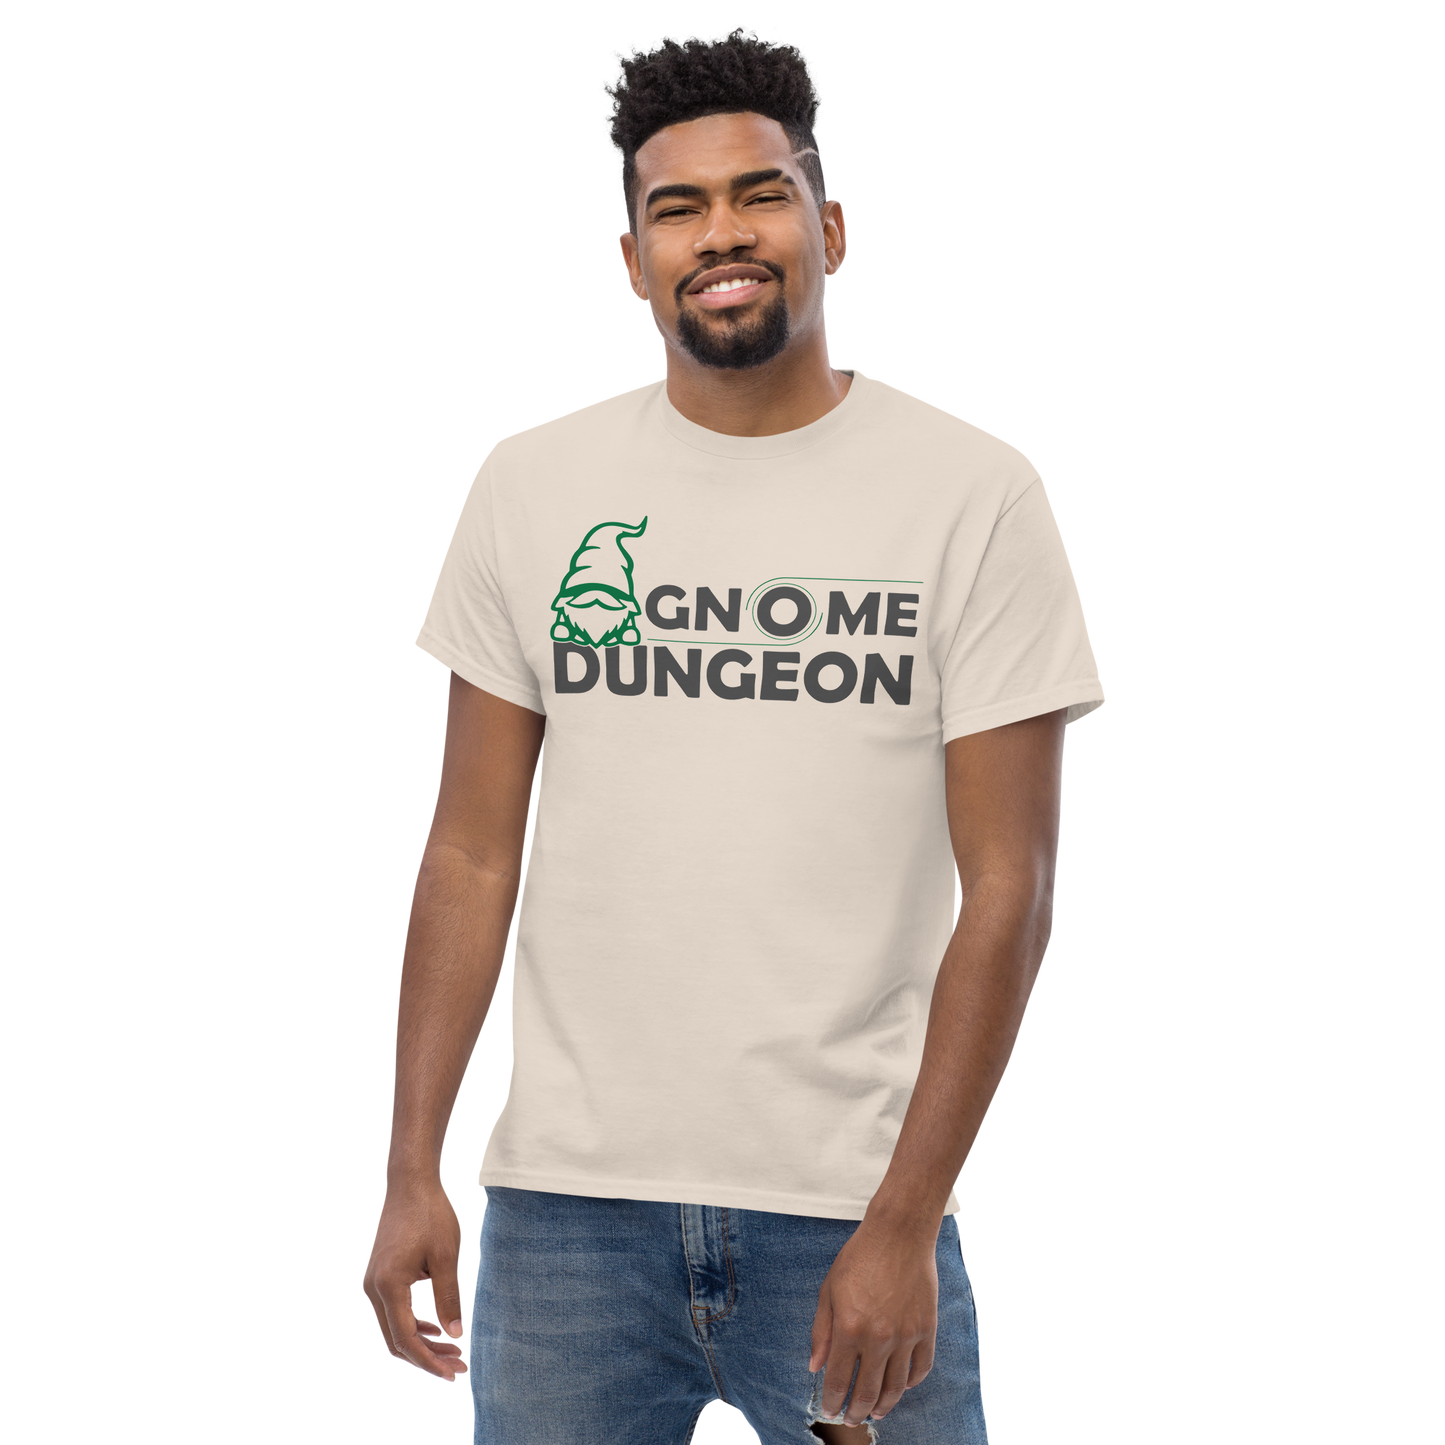 Gnome Dungeon tee